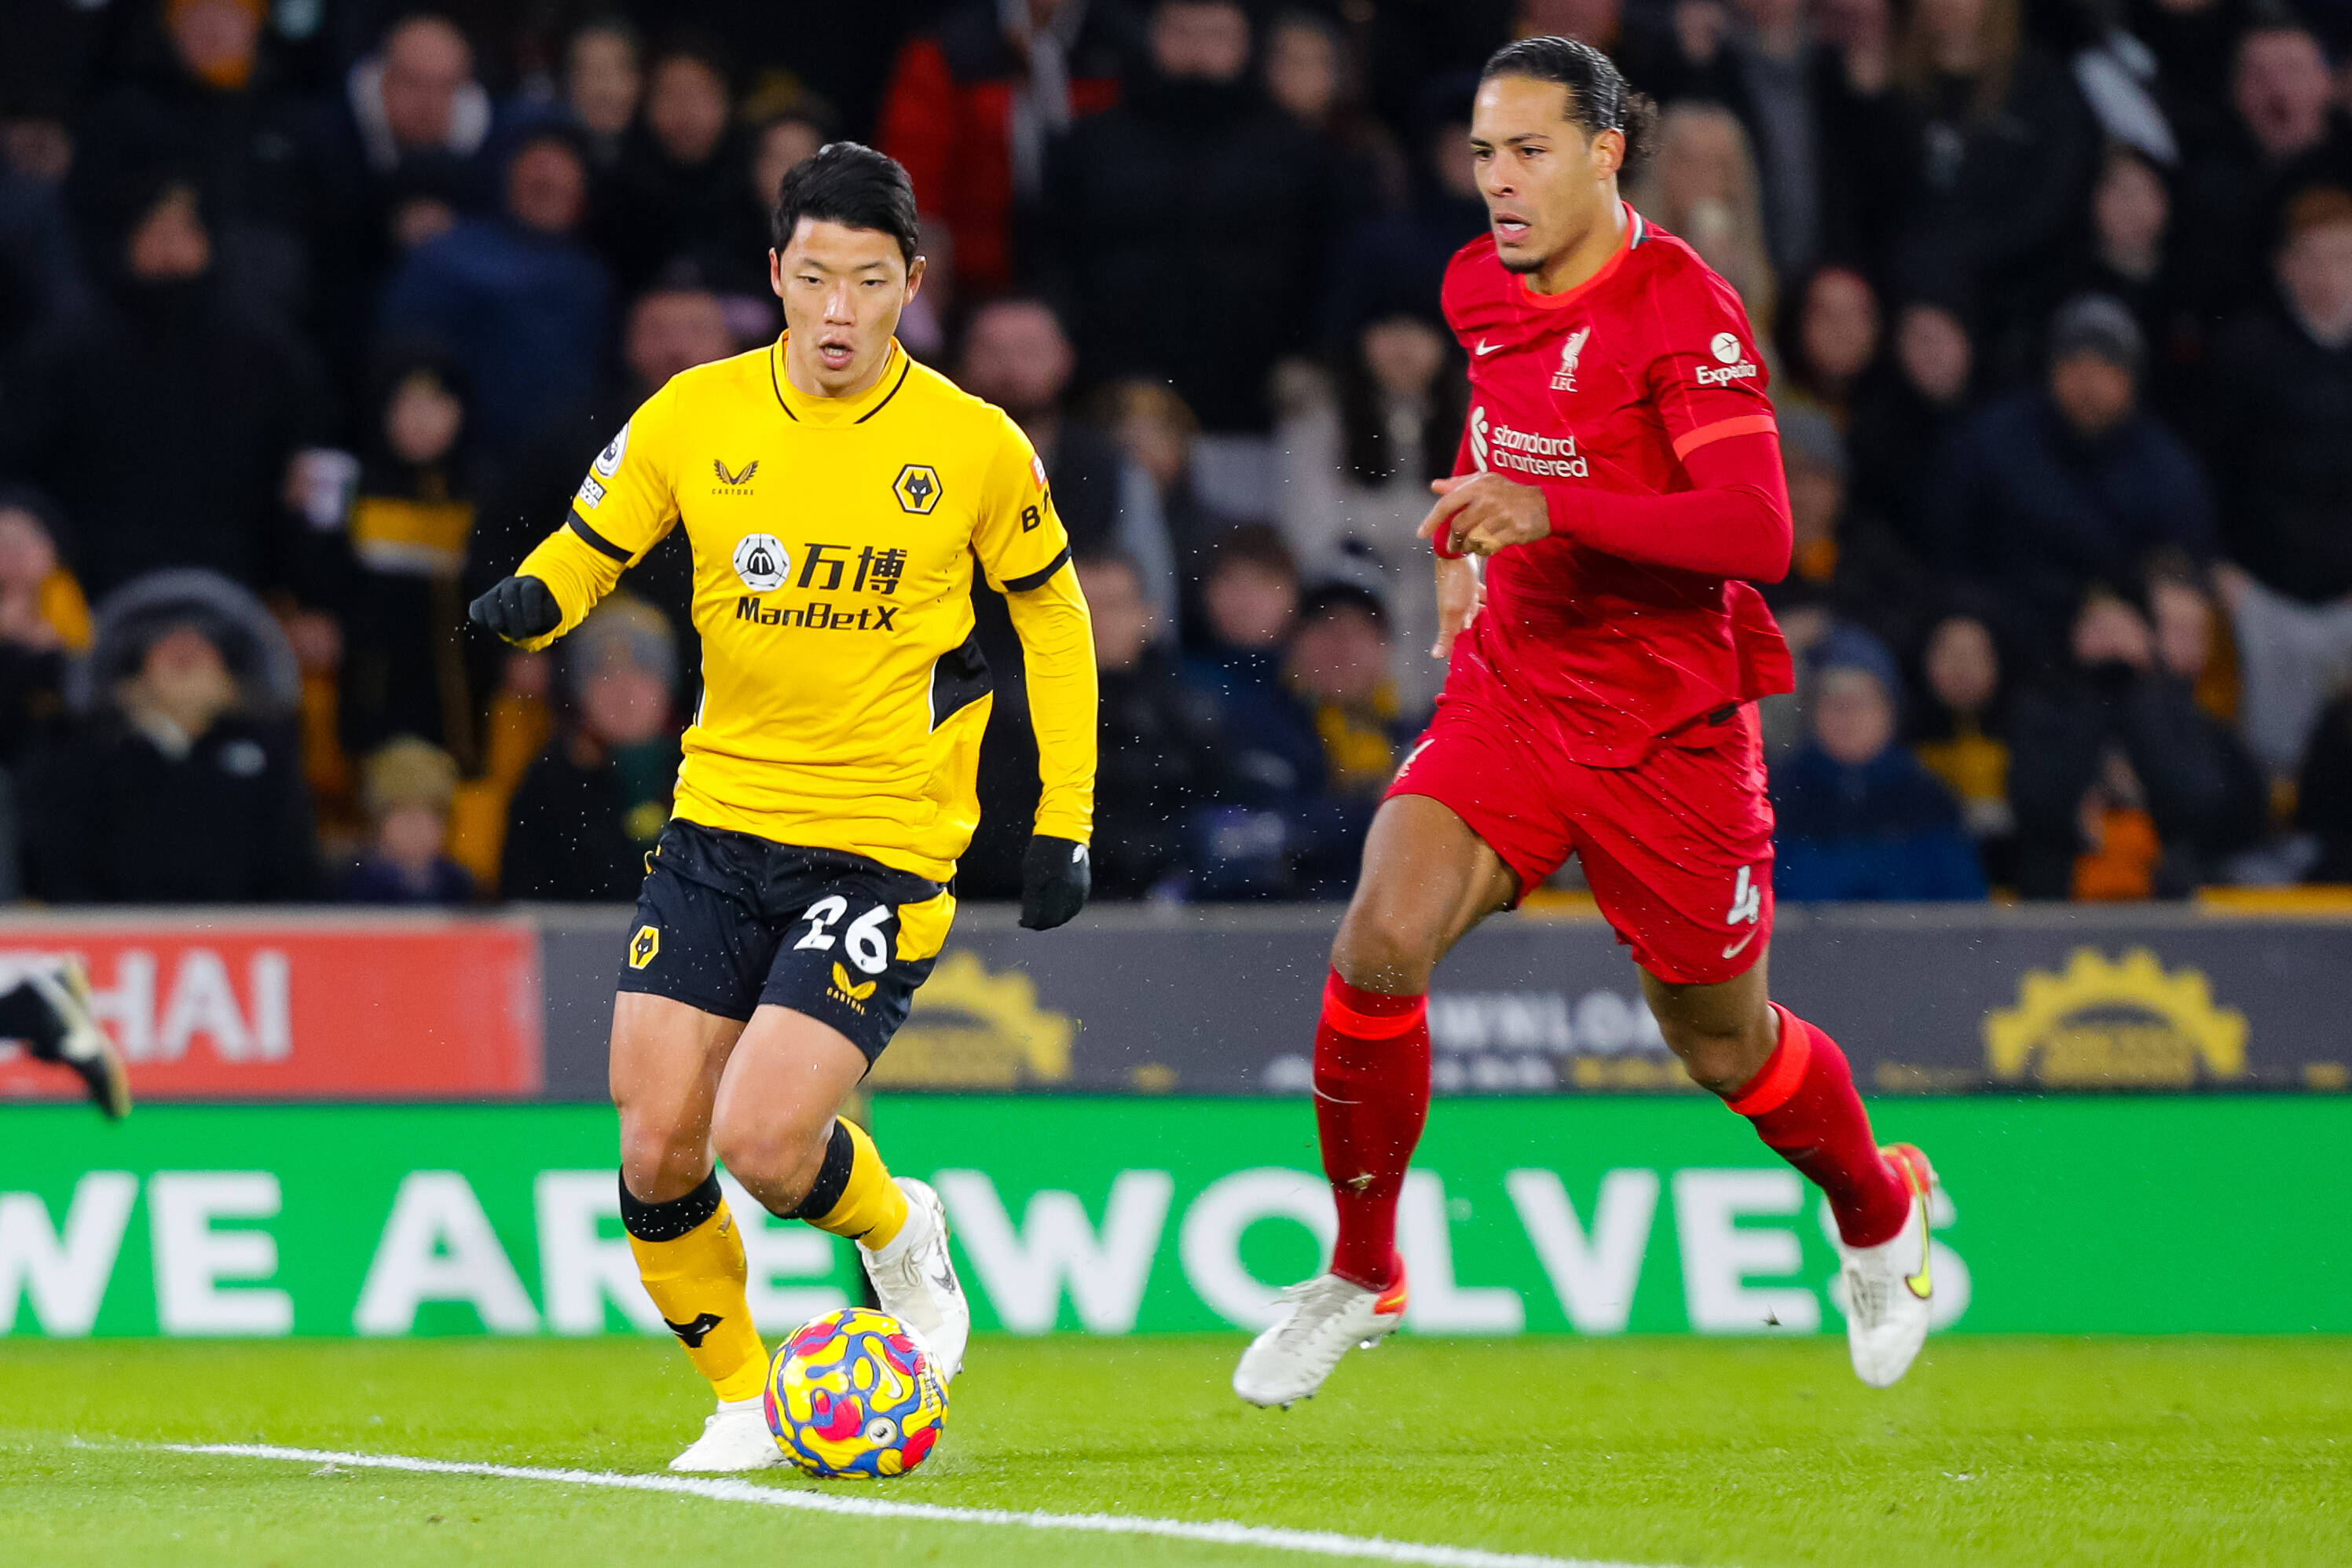 Liverpool defender Virgil van Dijk (right) pictured in pursuit of Wolves forward Hwang Hee-chan during a Premier League game at Molineux in December 2021